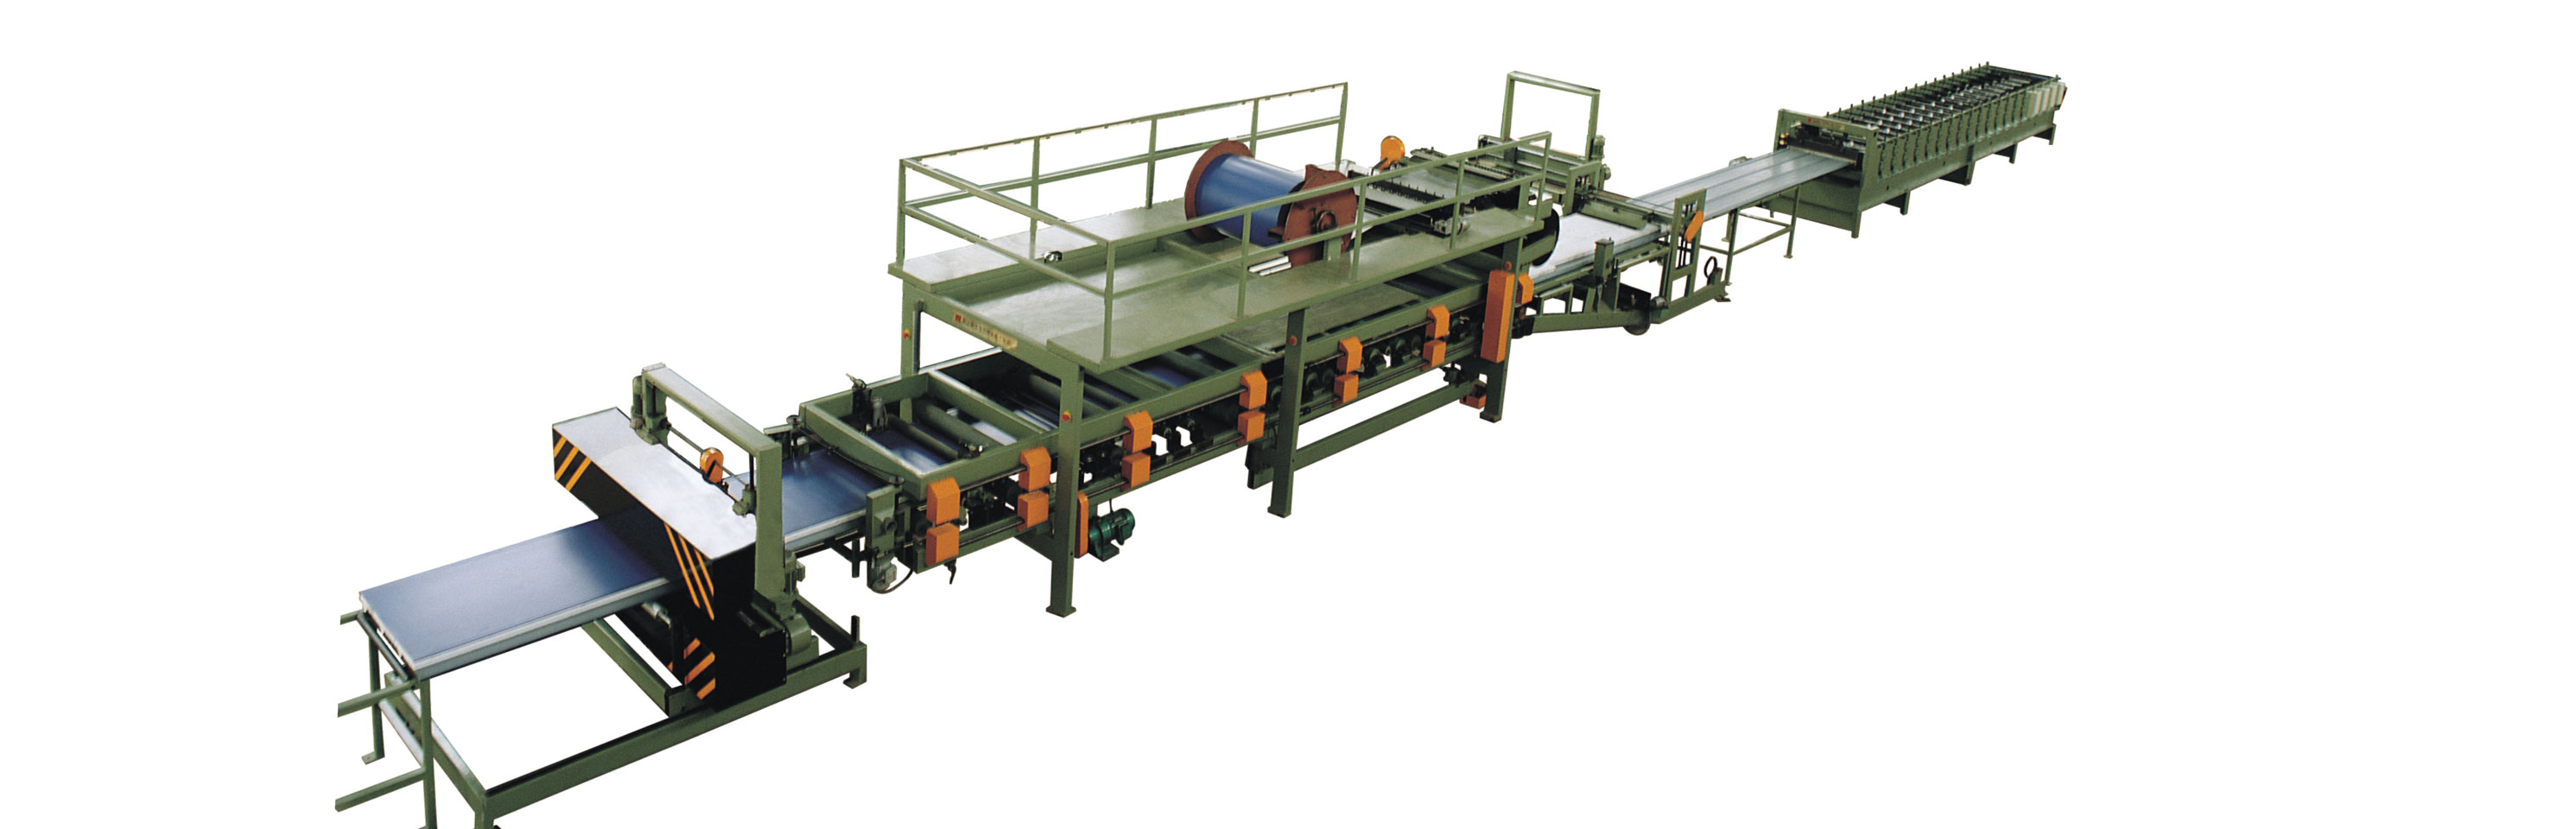 What are the Specifications of Foam Sandwich Panels and Rock Wool Sandwich Panels in the Sandwich Panel Machine?